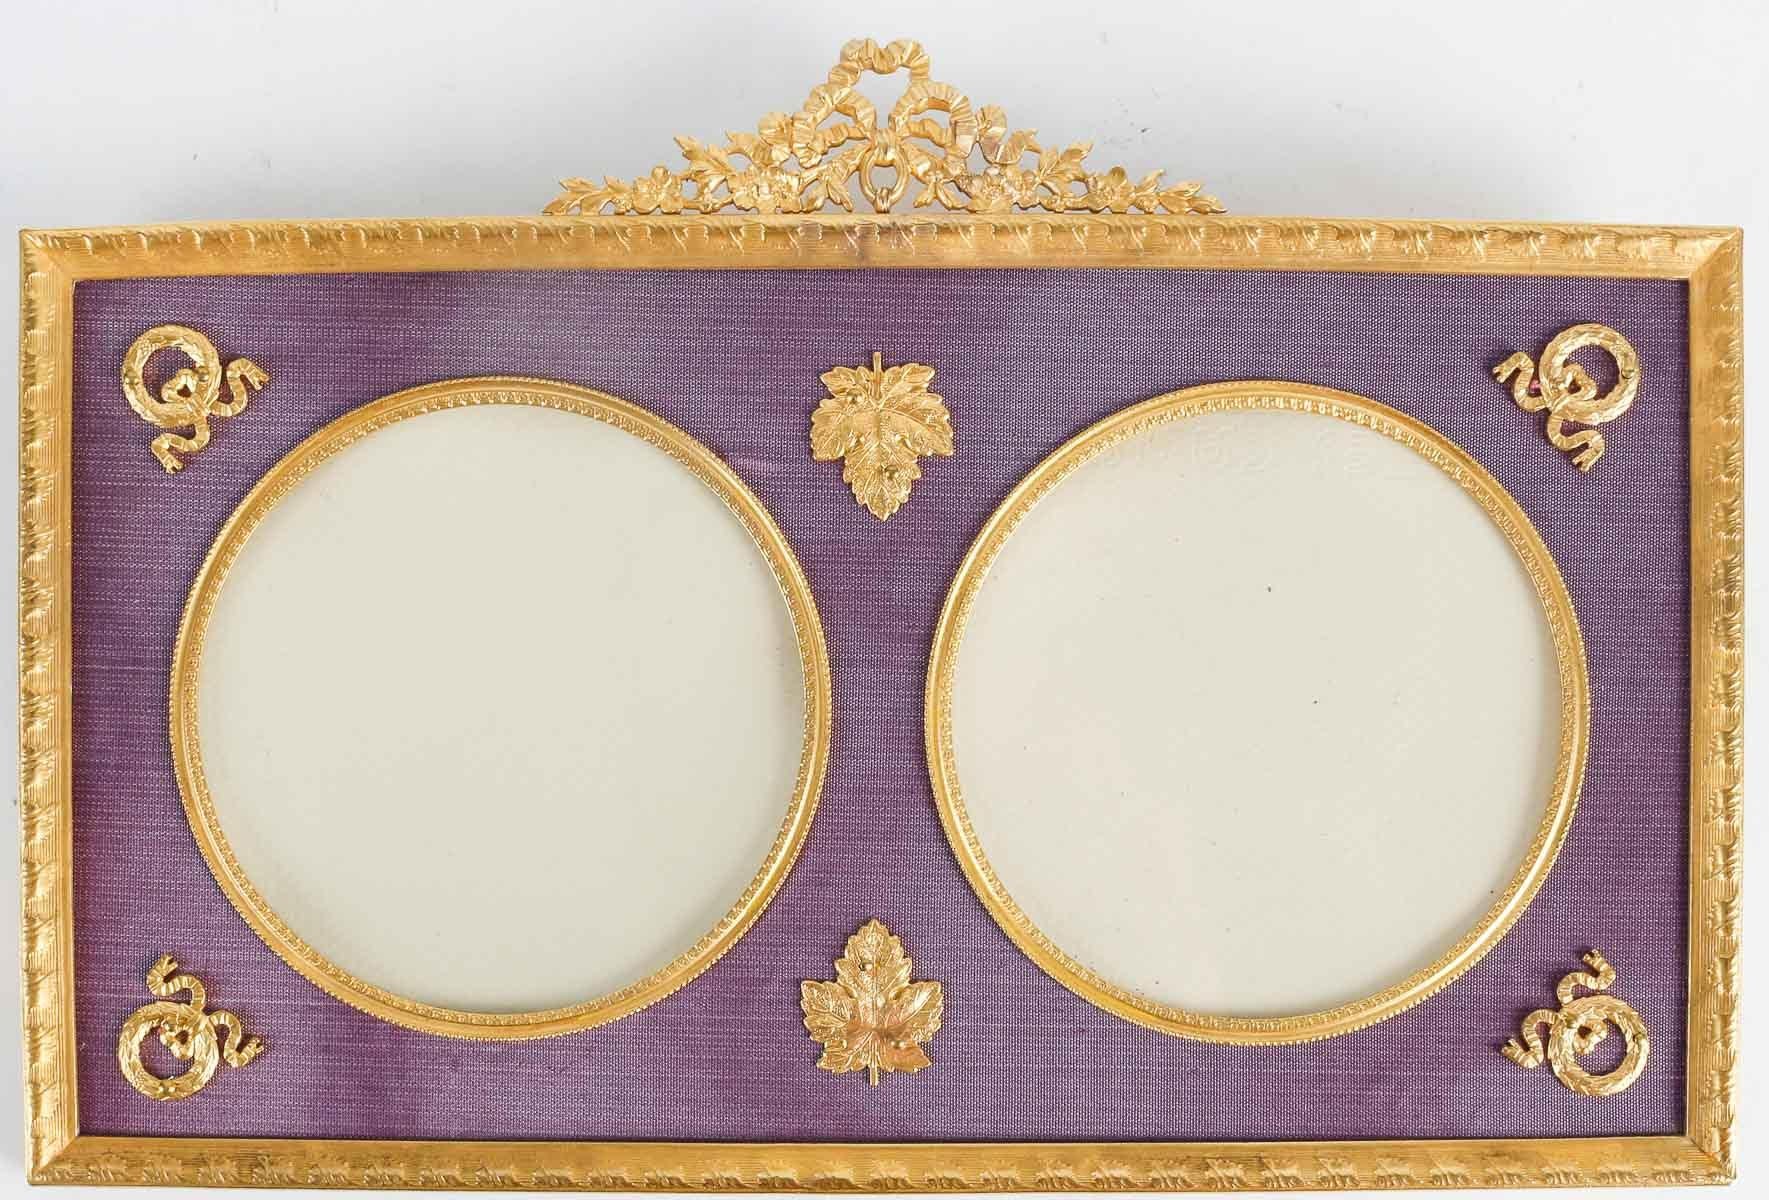 Photo Frames in Gilt Bronze and Fabric, 19th Century, Louis XV Style. 2